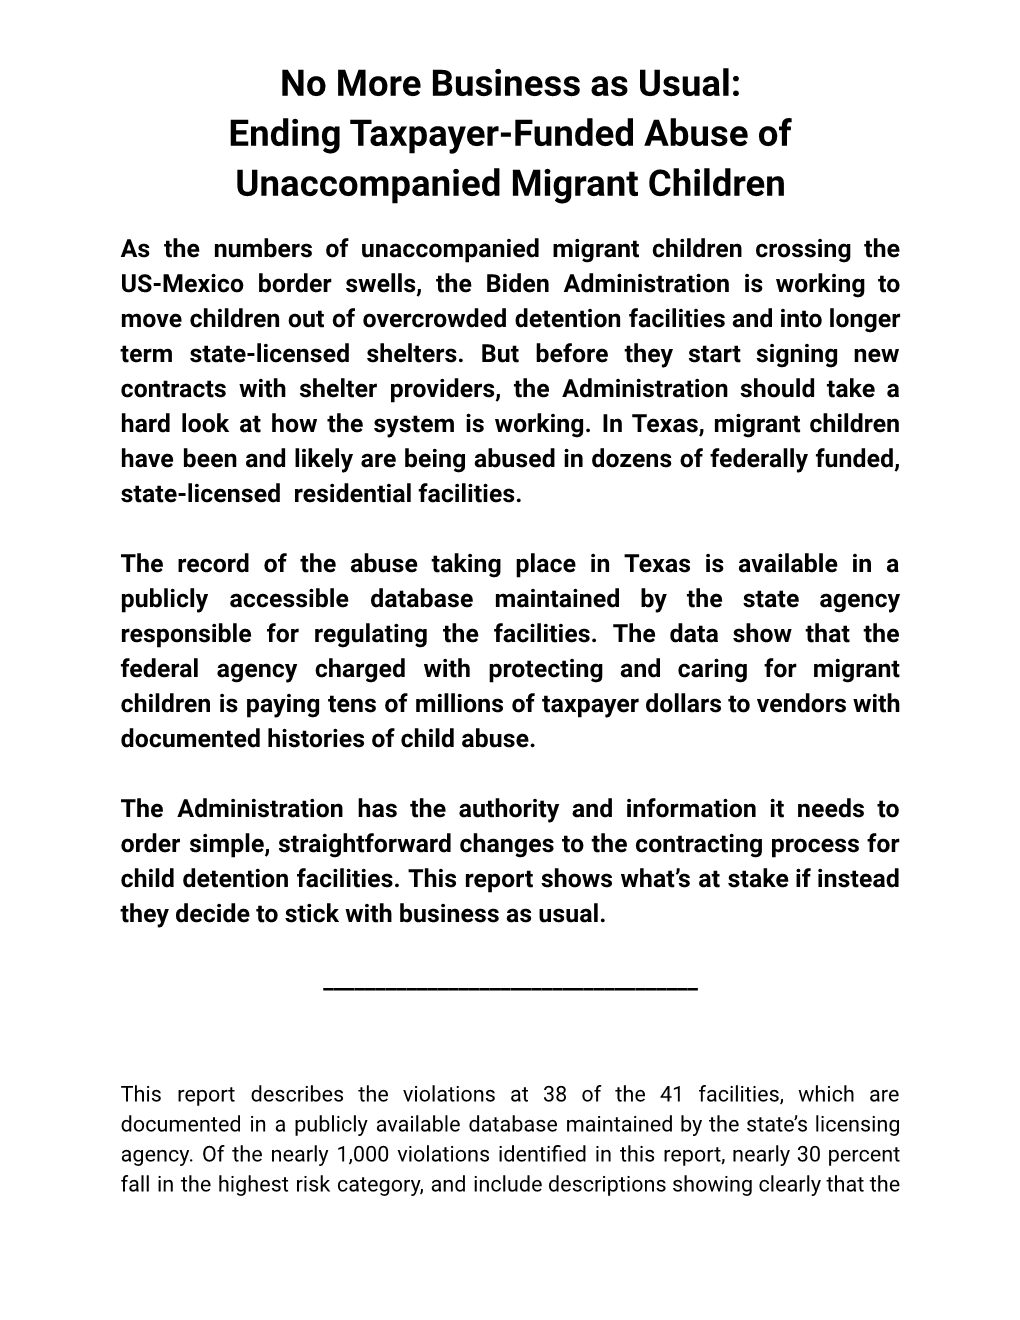 Ending Taxpayer-Funded Abuse of Unaccompanied Migrant Children